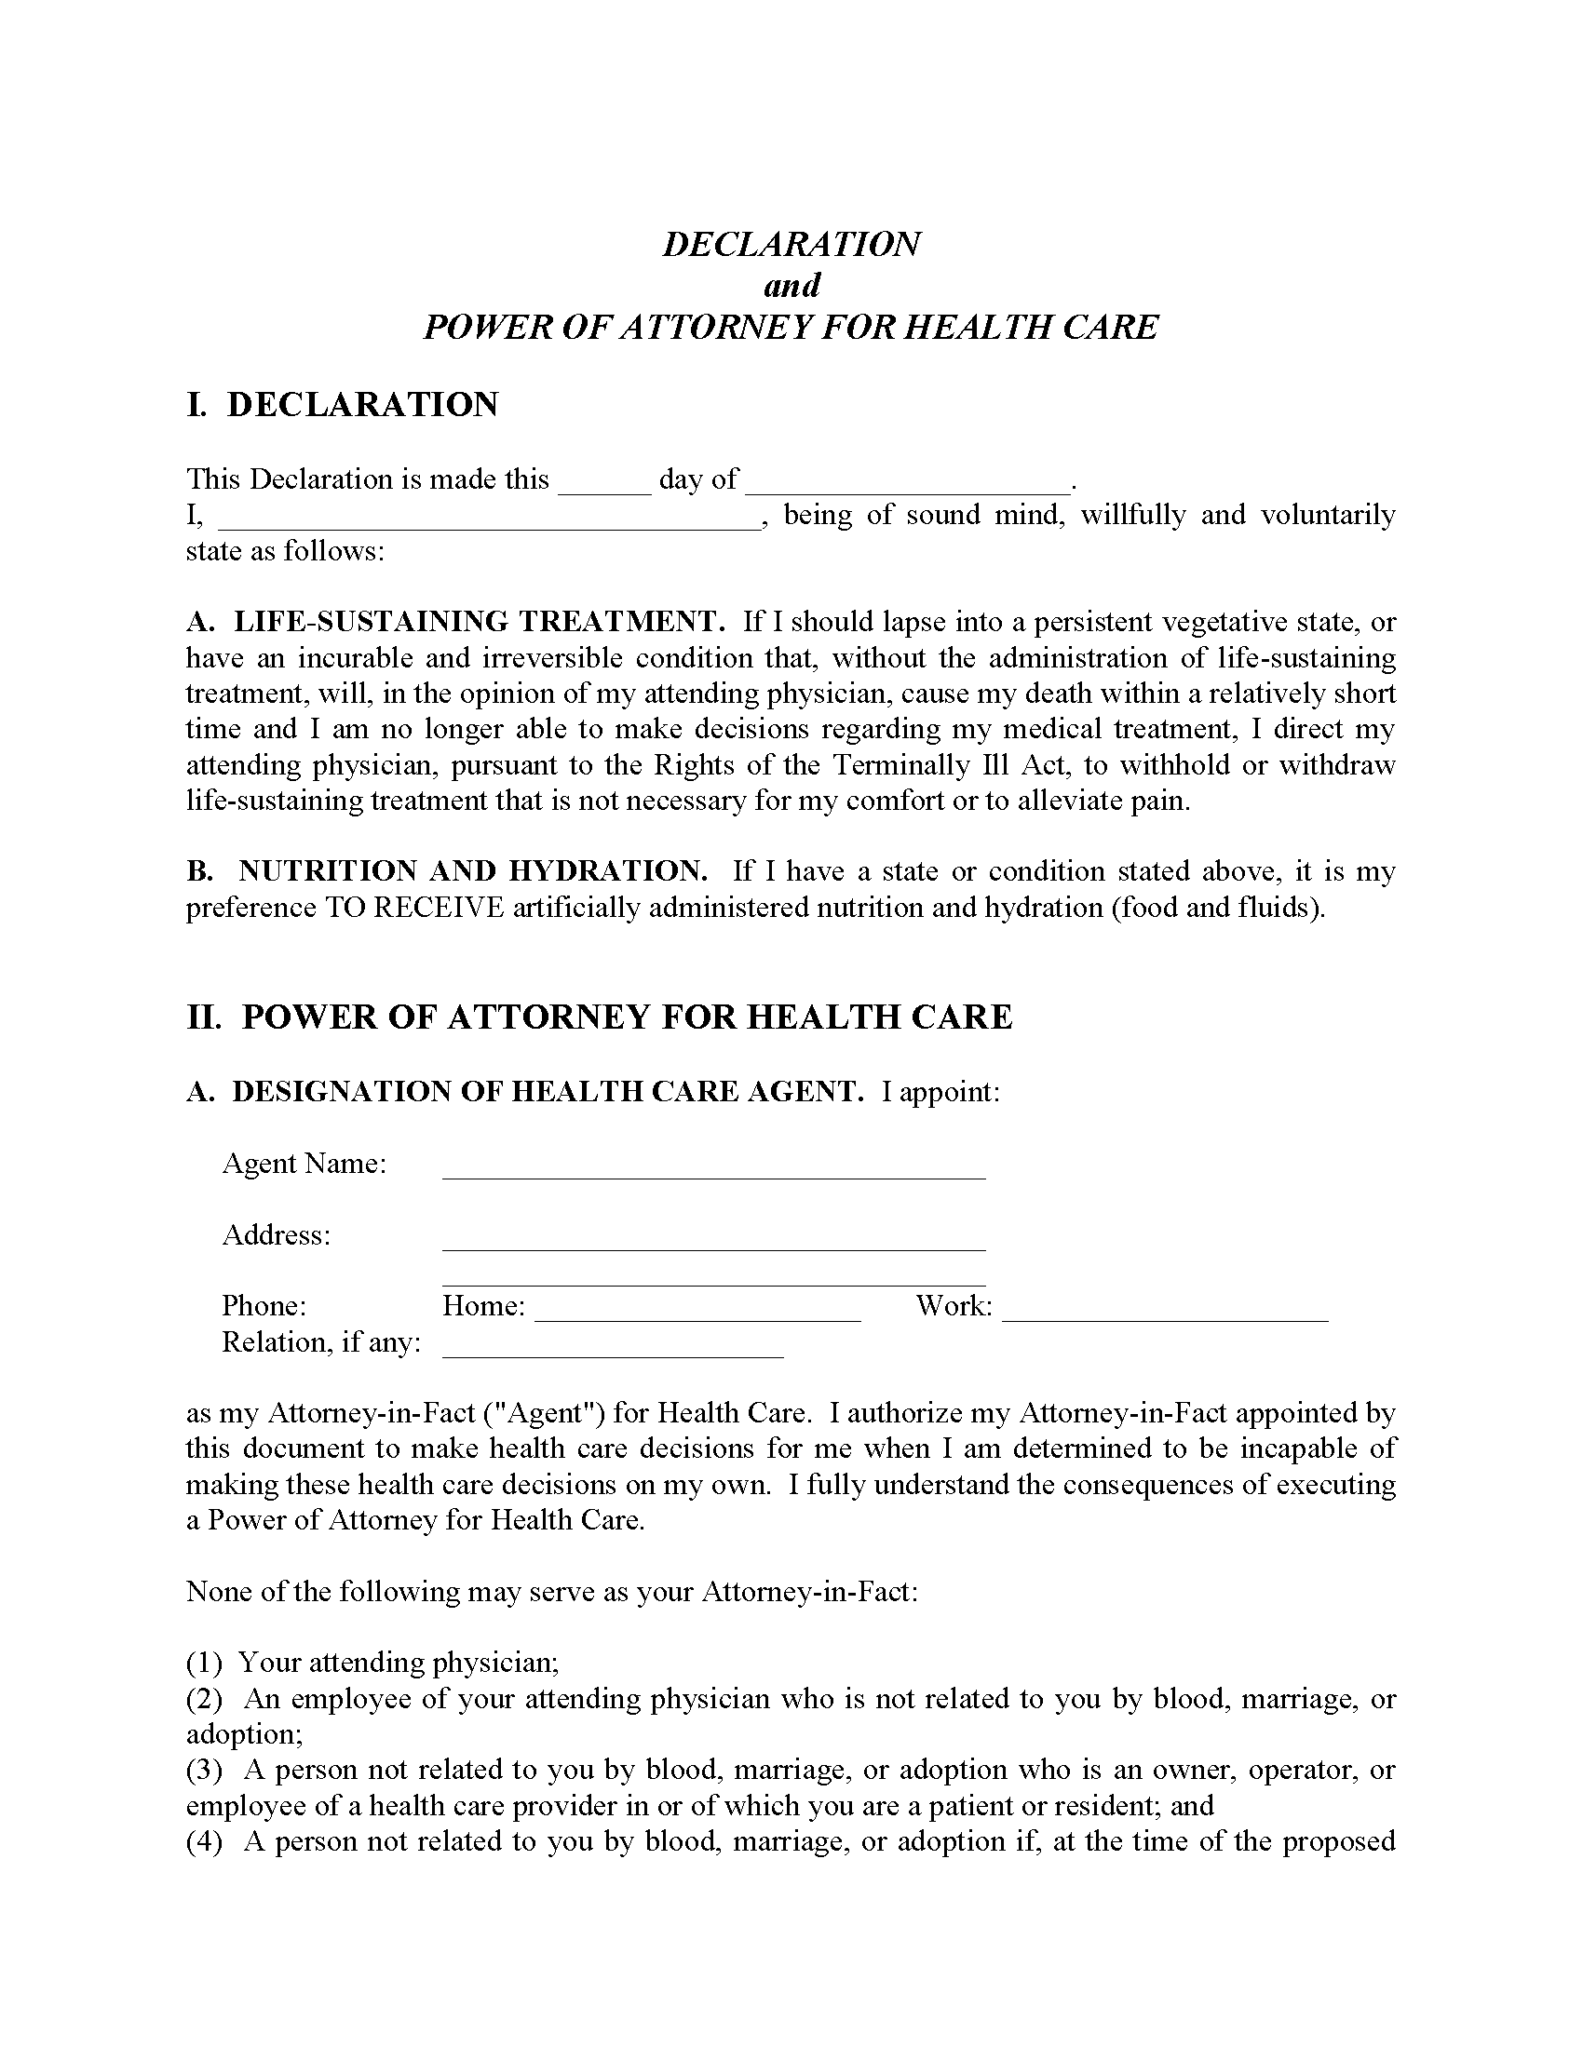 Minnesota Living Will Form Free Printable Legal Forms Living Will